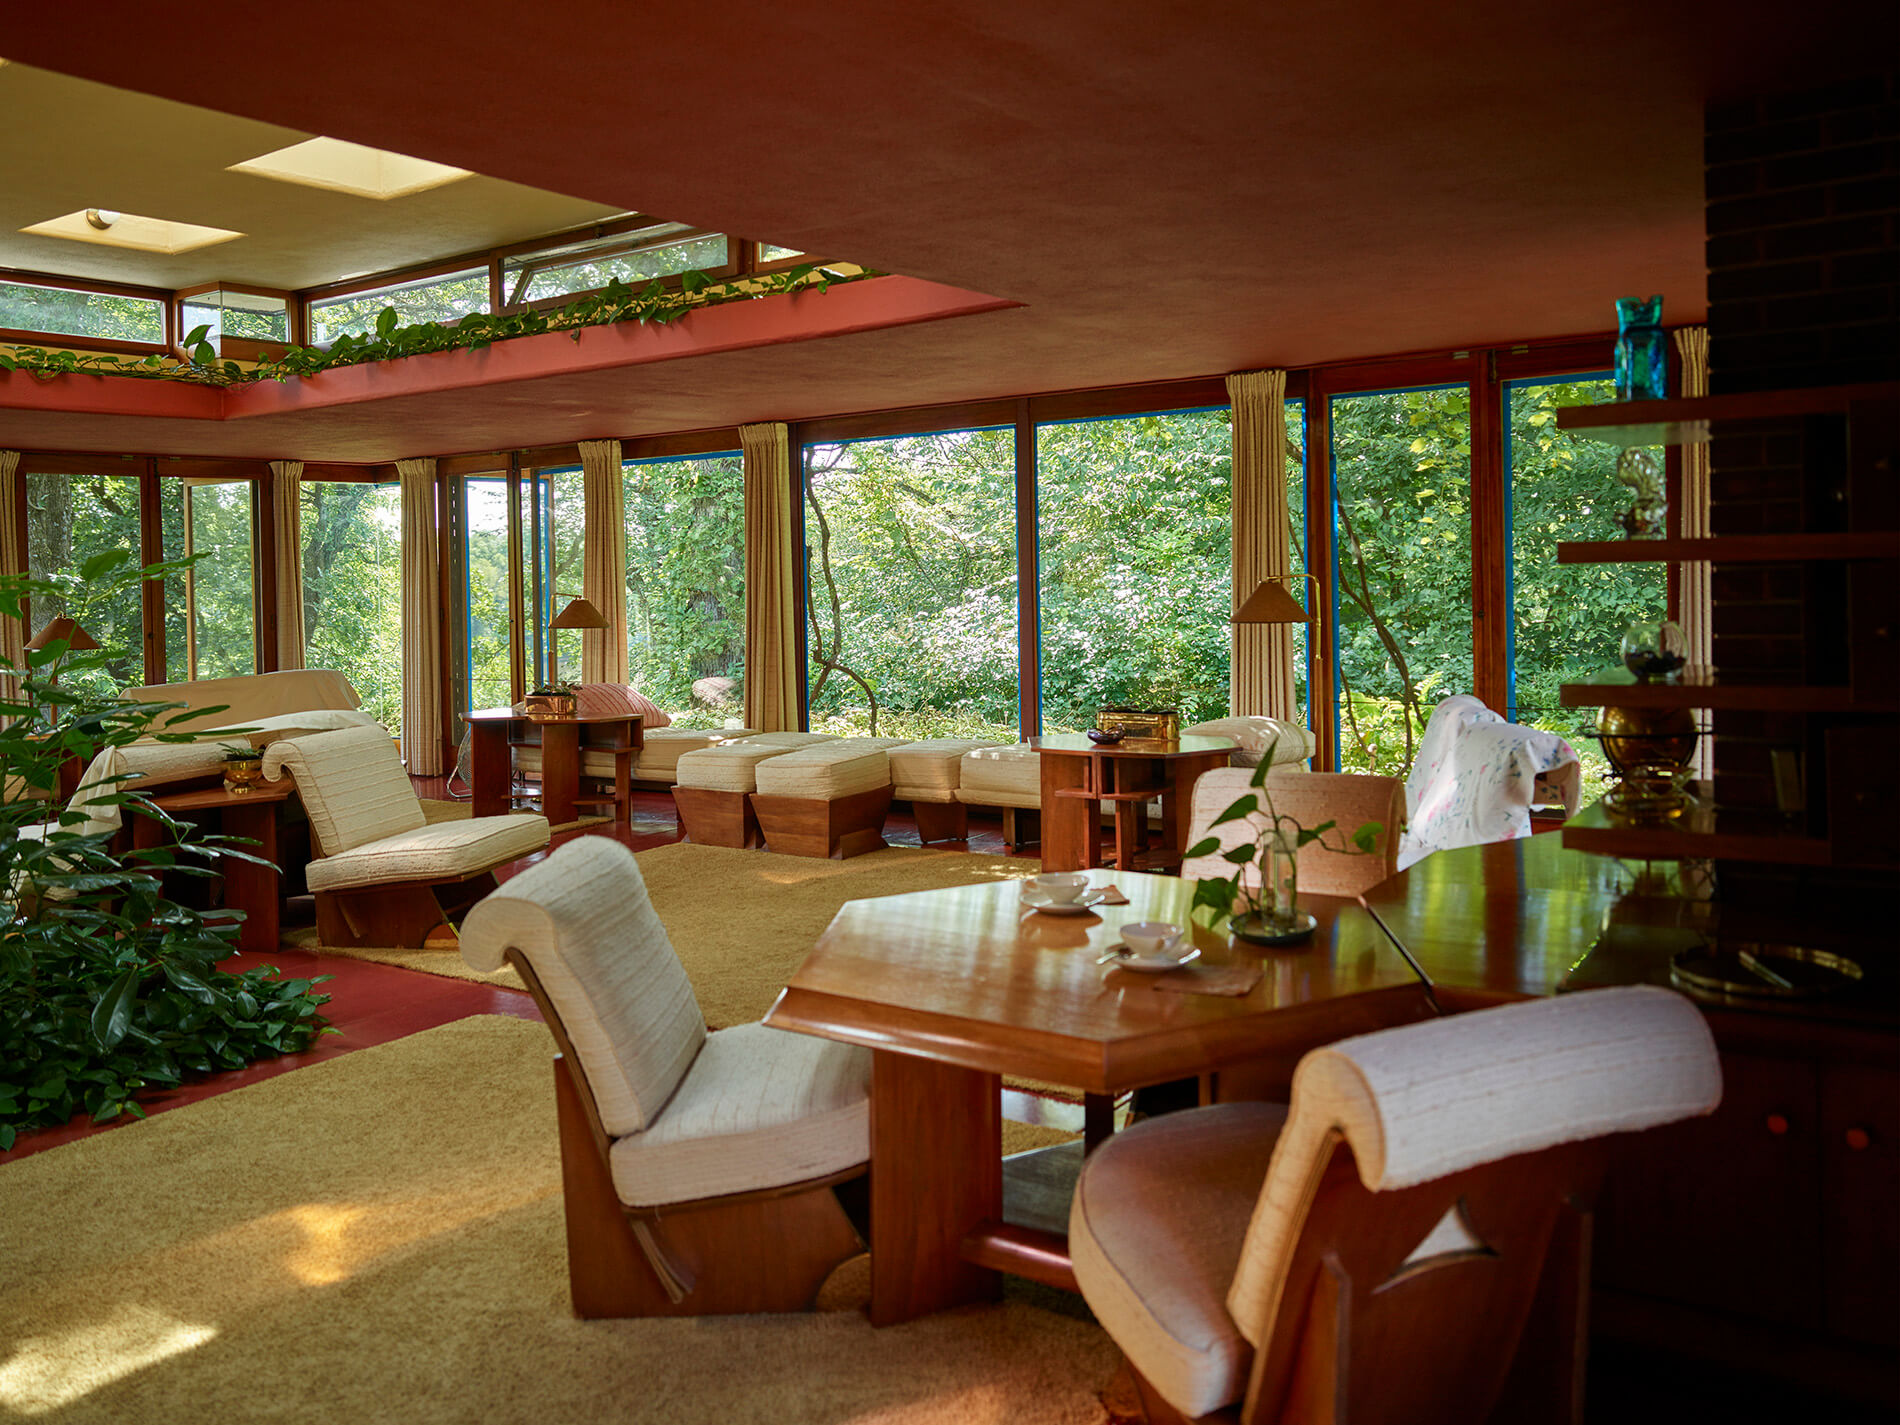 upstate homes for sale dobbs ferry pleasantville frank lloyd wright